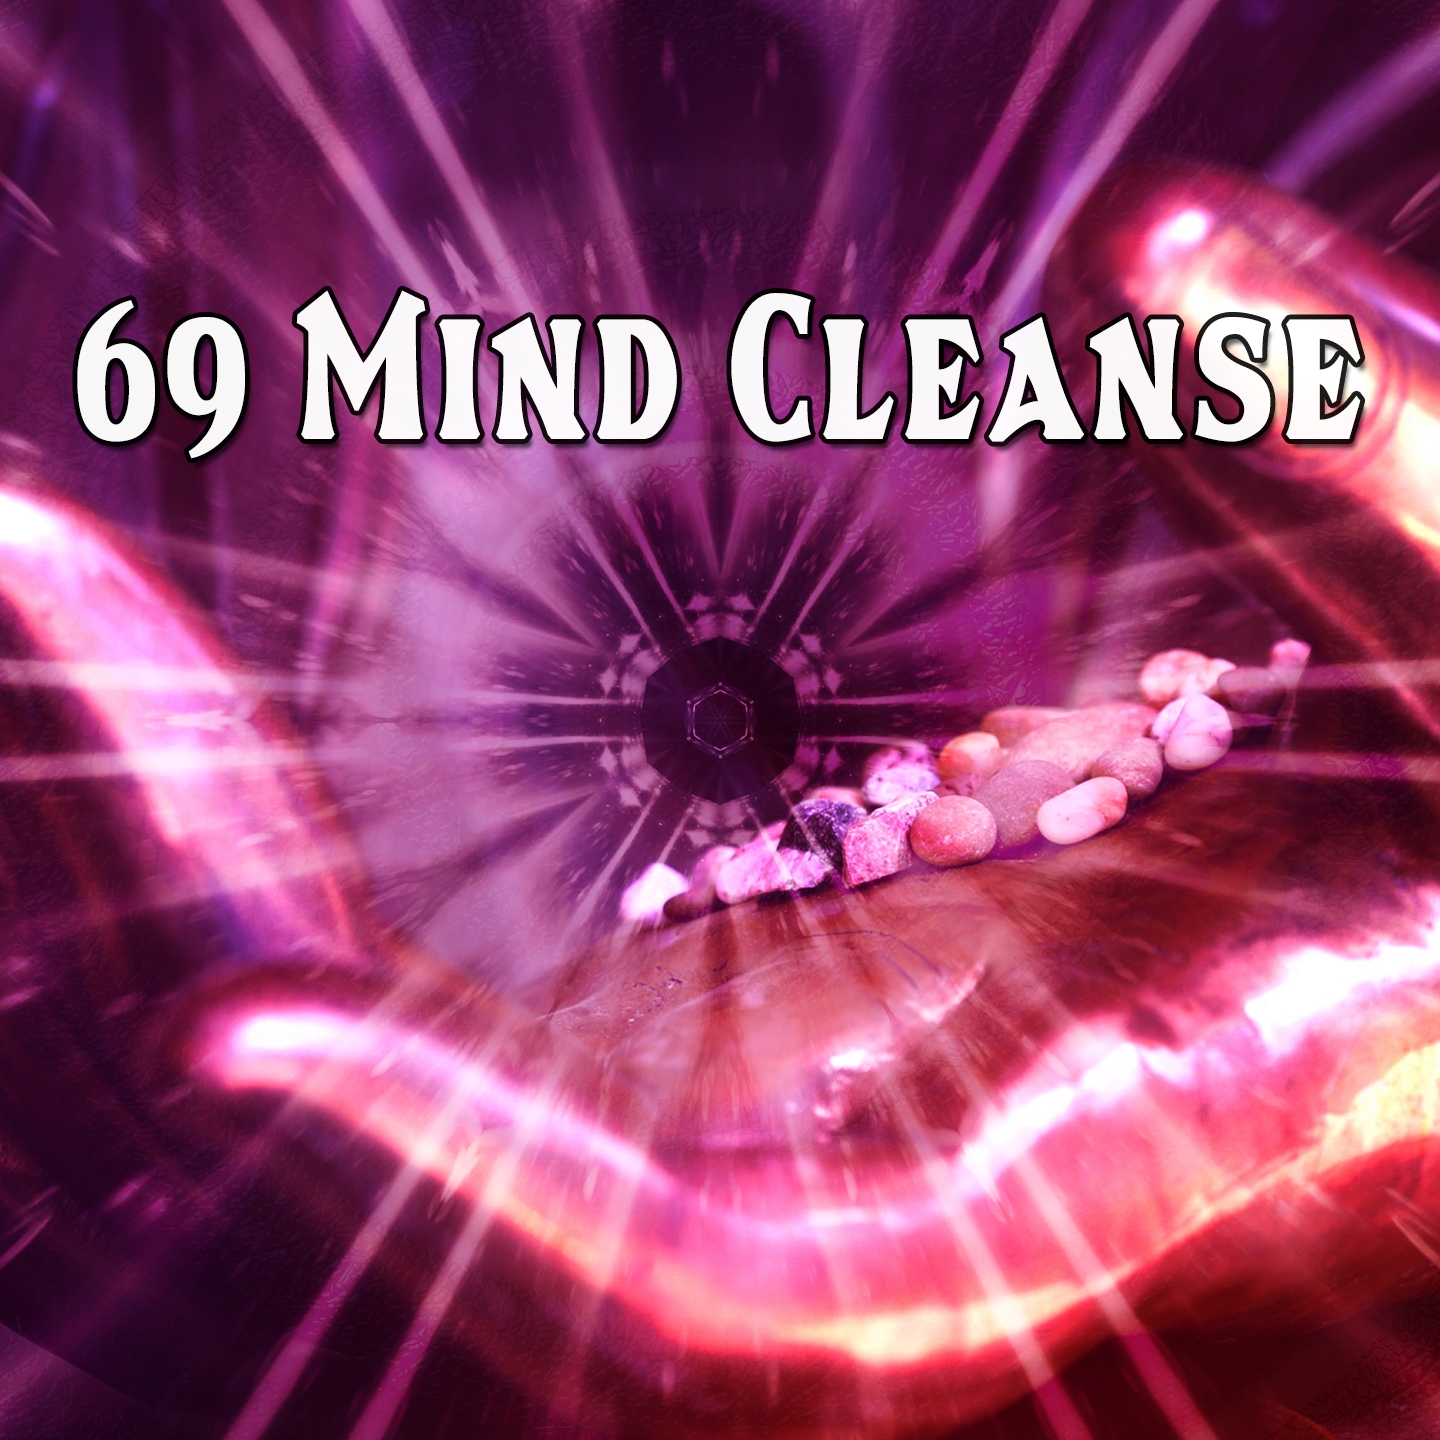 69 Mind Cleanse